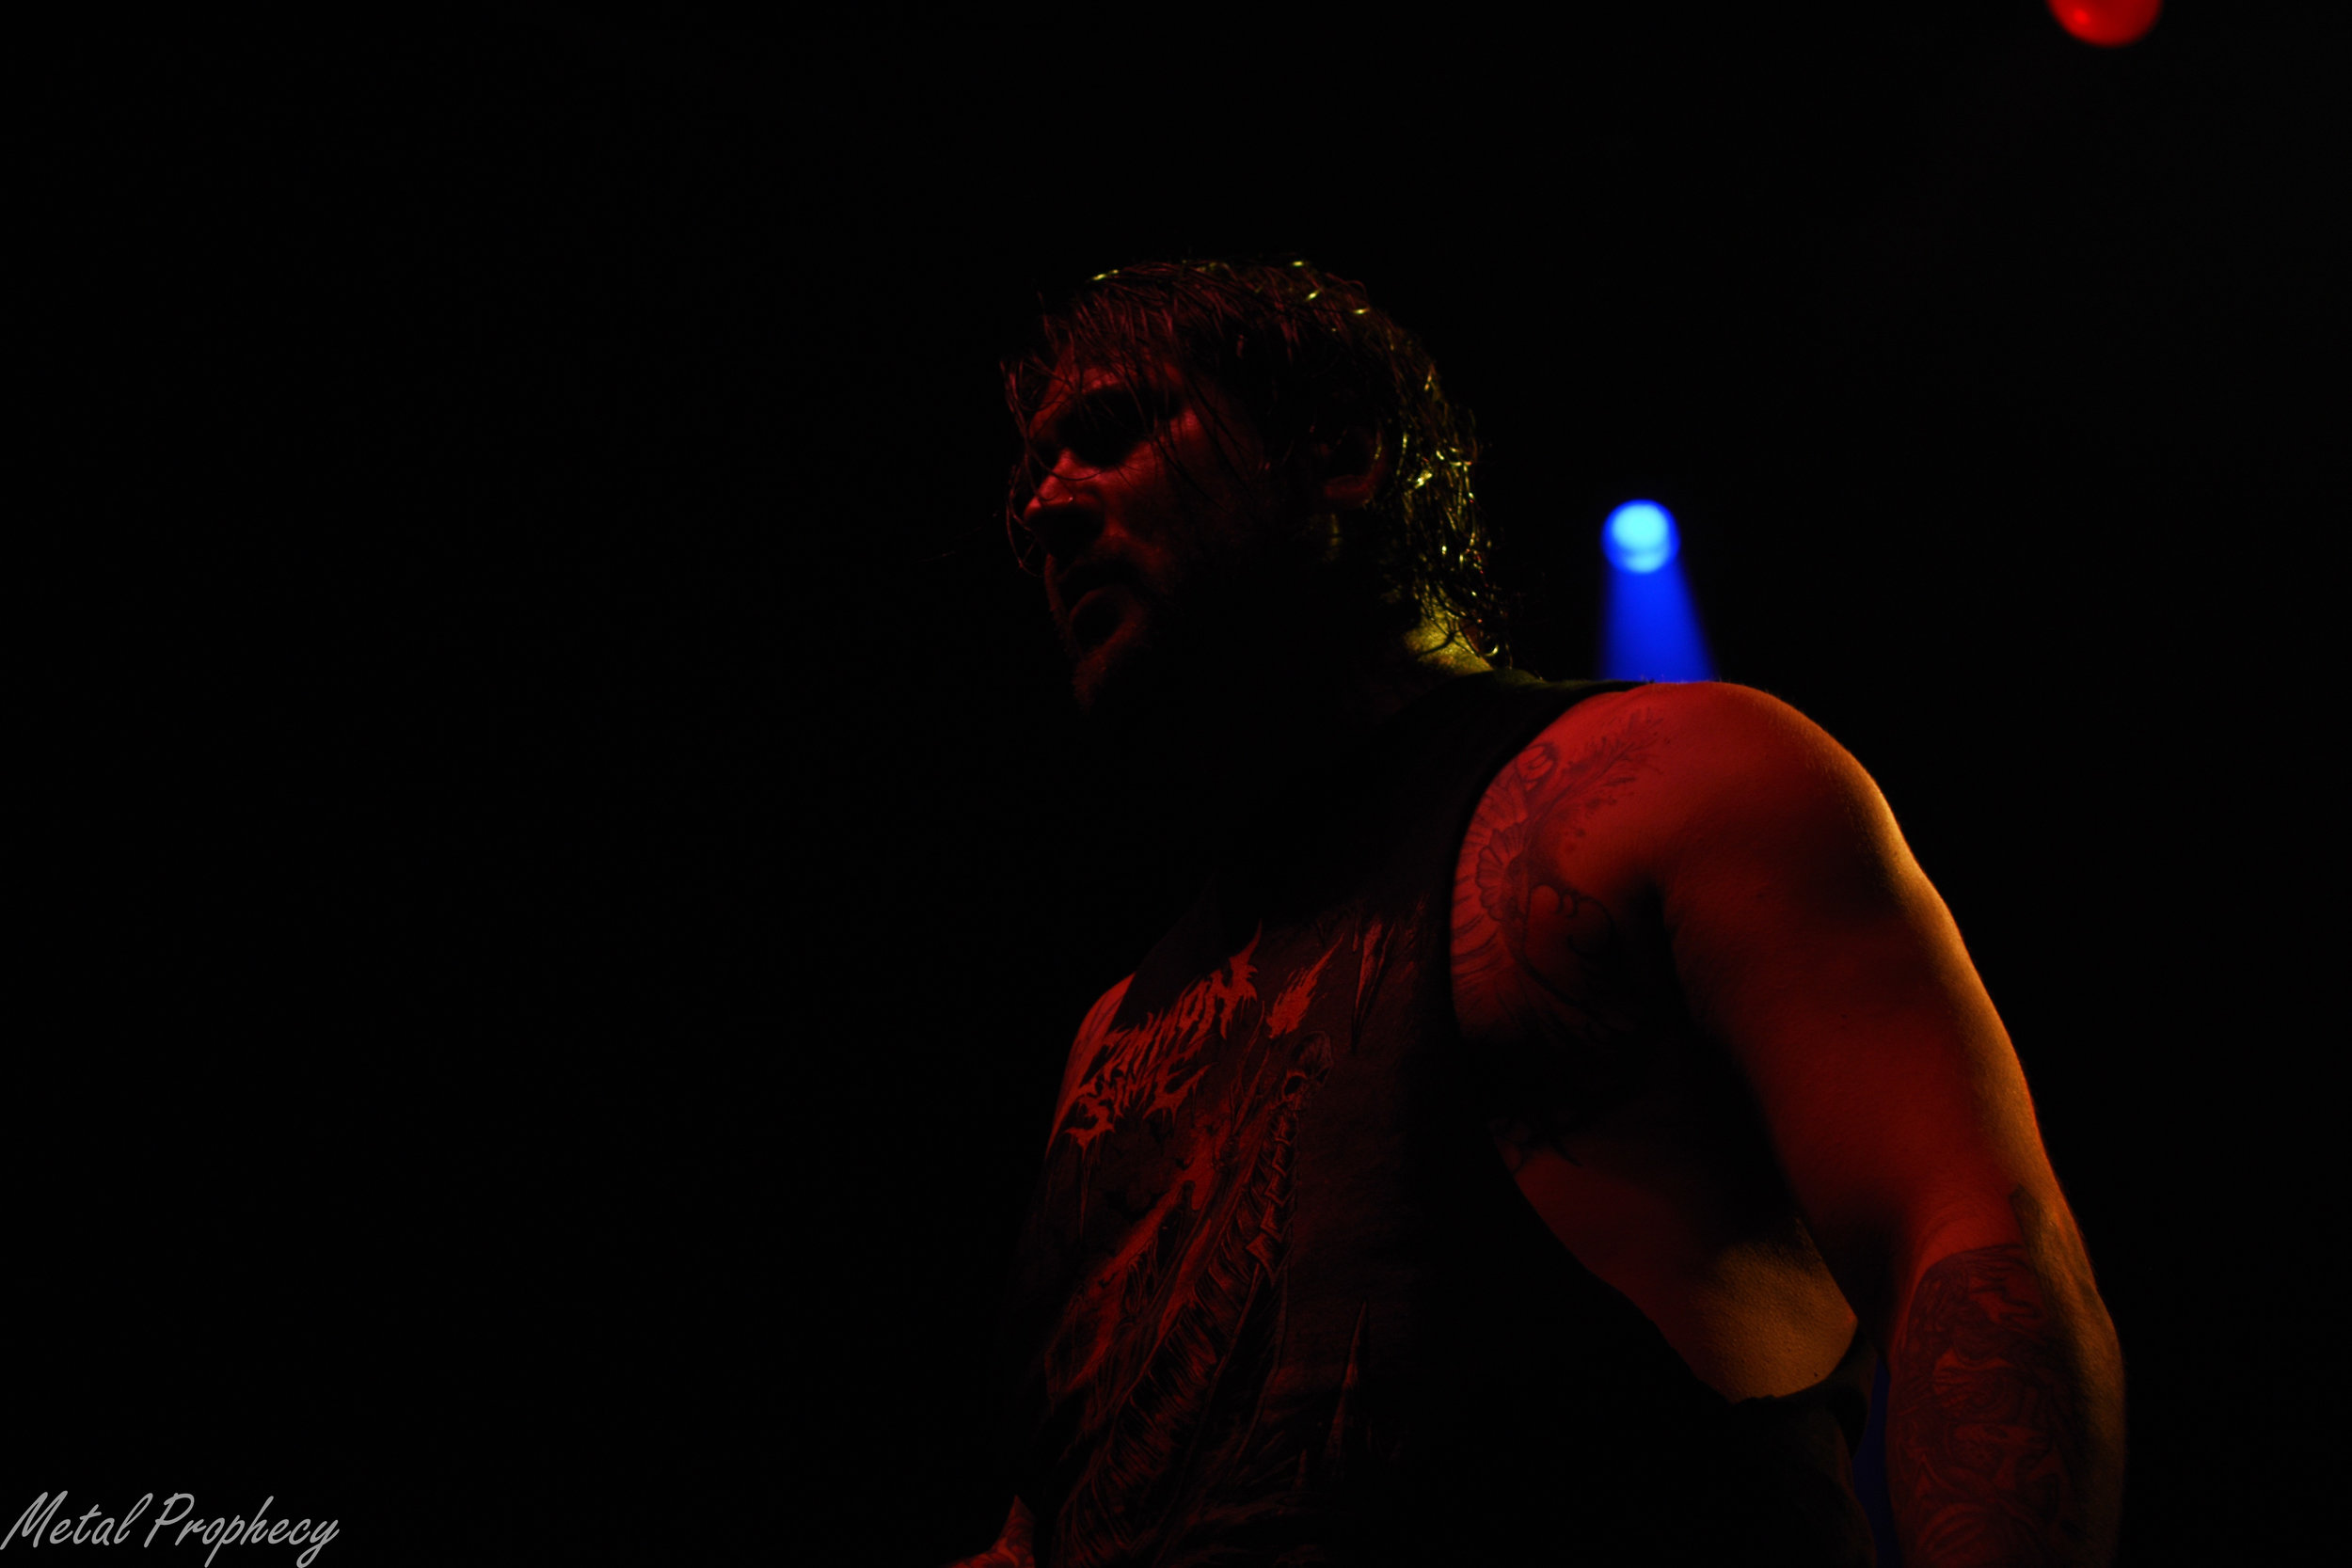 Fit For an Autopsy live at The Masquerade